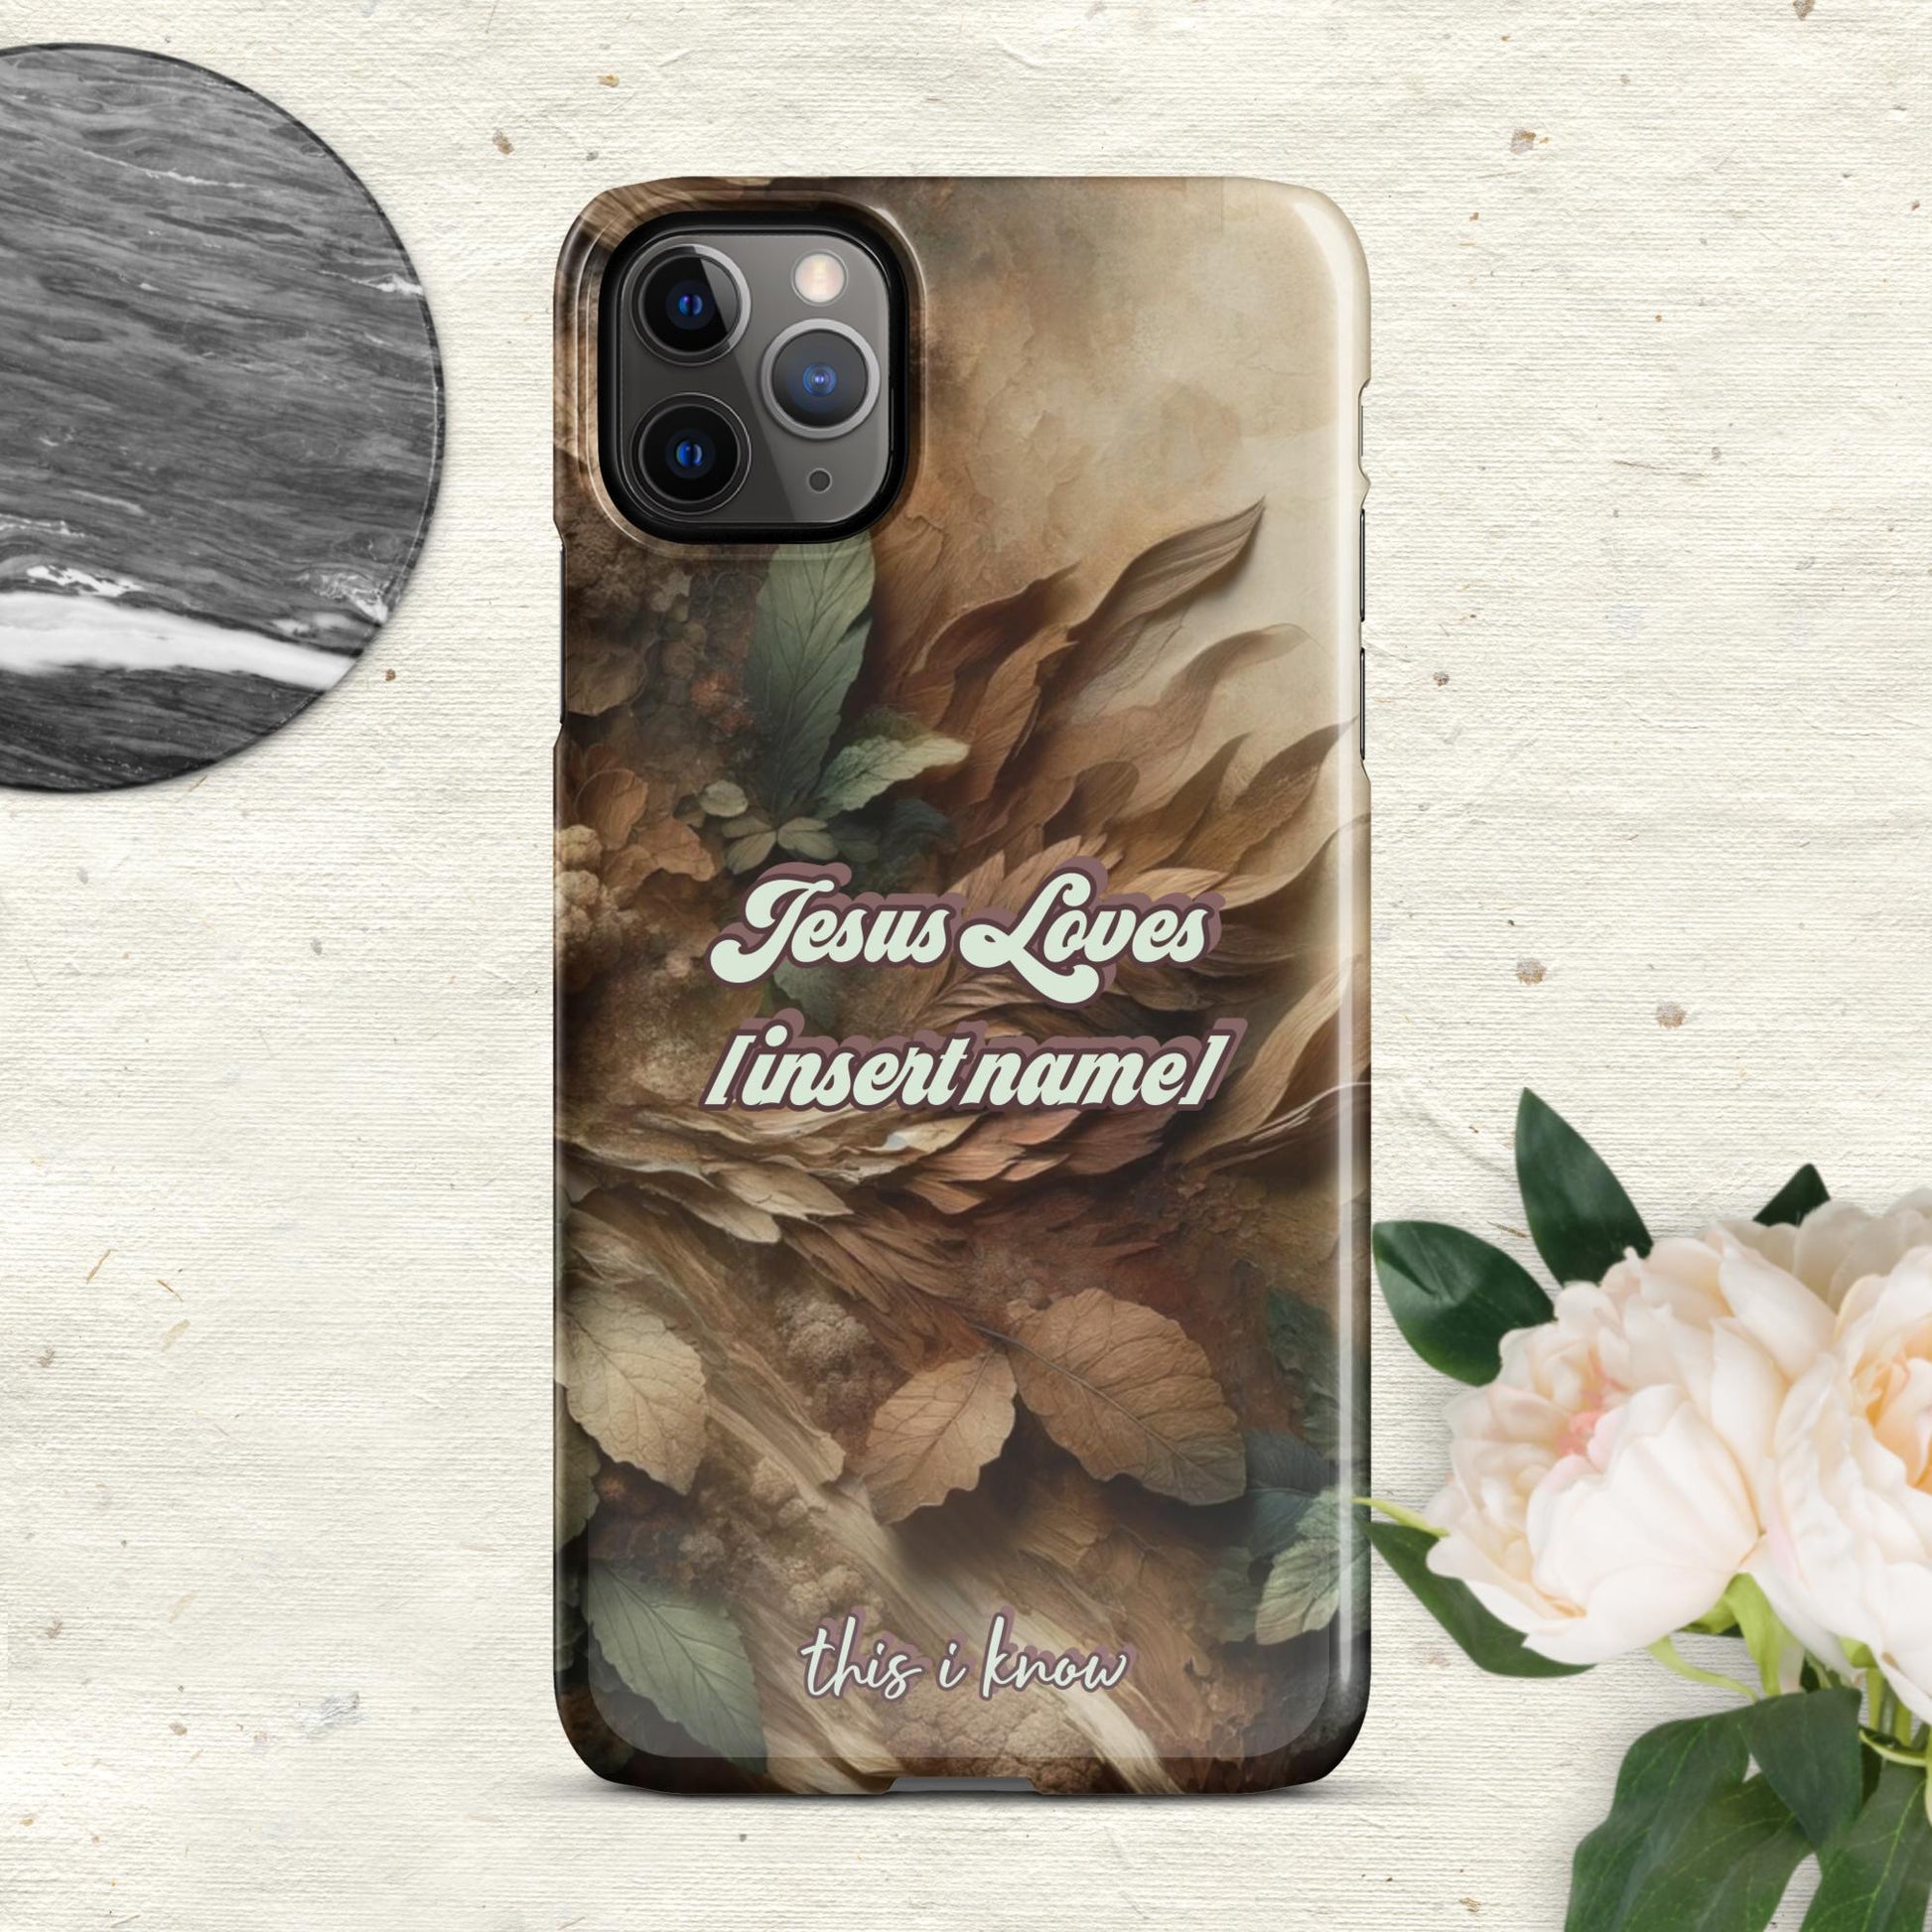 Trendyguard Glossy / iPhone 11 Pro Max Jesus Loves [insertname] This I Know | Custom Snap case for iPhone®